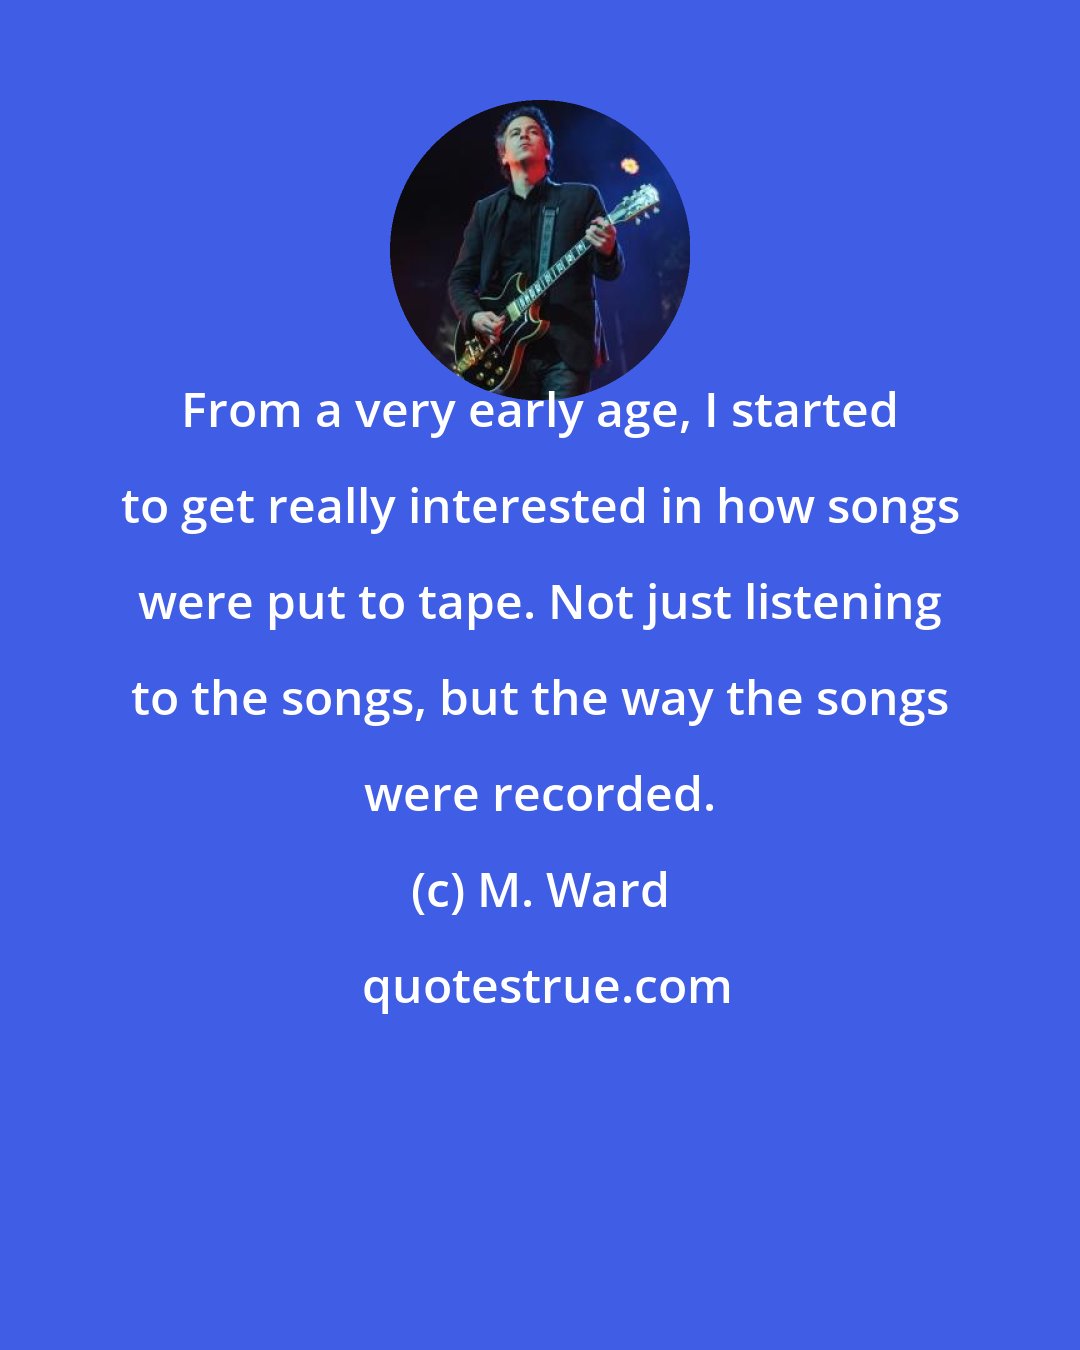 M. Ward: From a very early age, I started to get really interested in how songs were put to tape. Not just listening to the songs, but the way the songs were recorded.